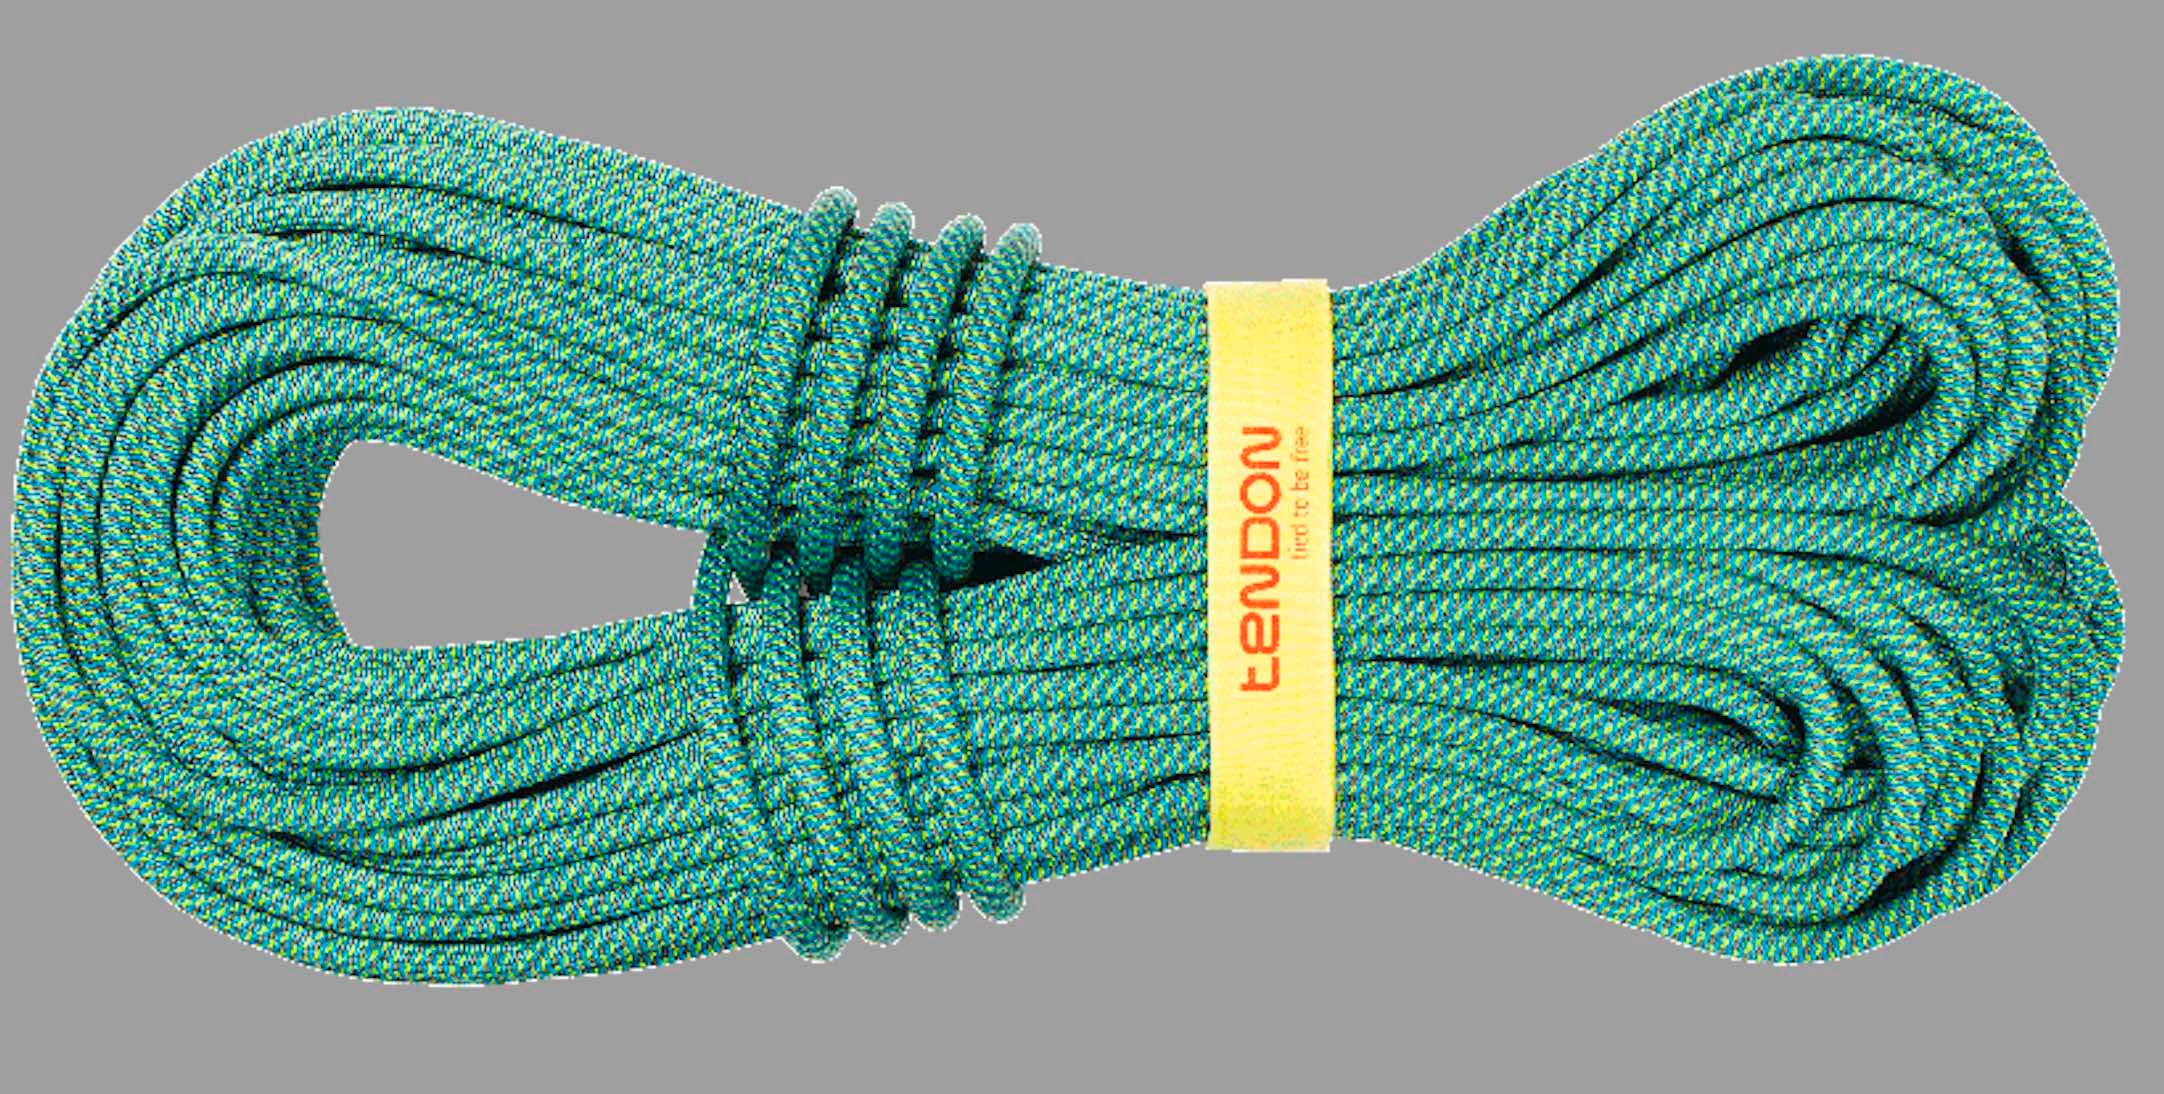  Tendon Master Pro 9.7 - Dynamic Rope for Rock, Climbing,  Rappelling, Mountaineering, & More, UIAA Certified (Green 9.7mm x 60m) :  Sports & Outdoors